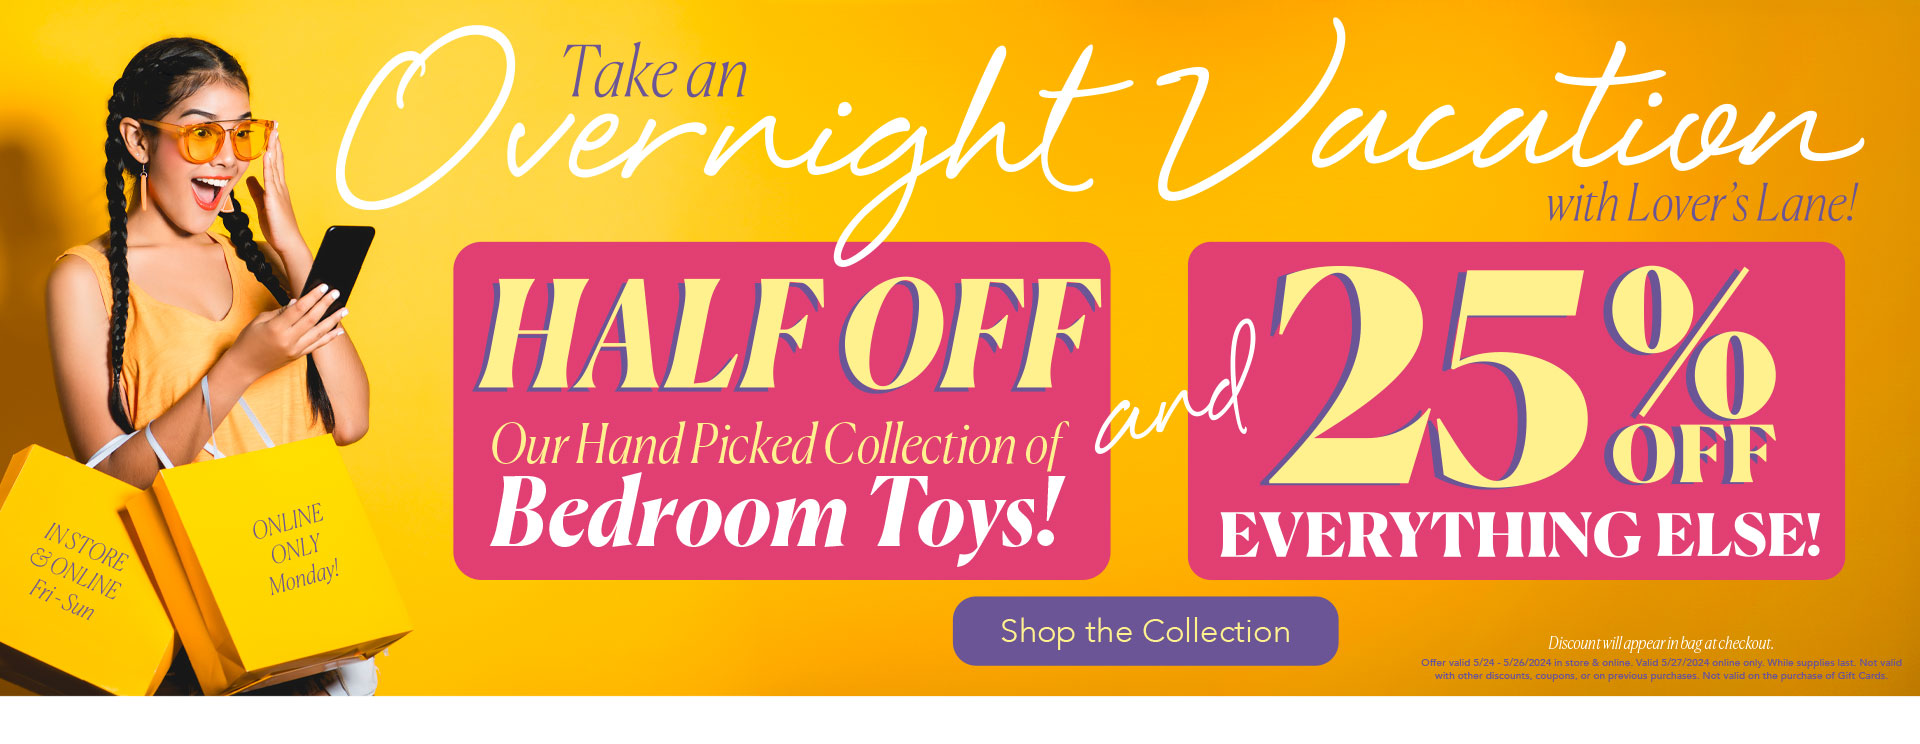 Take an Overnight Vacation with Lover's Lane - HALF OFF our hand picked collection of Bedroom Toys! AND 25% OFF EVERYTHING ELSE! - in store & online Fri-Sun Online Only Monday